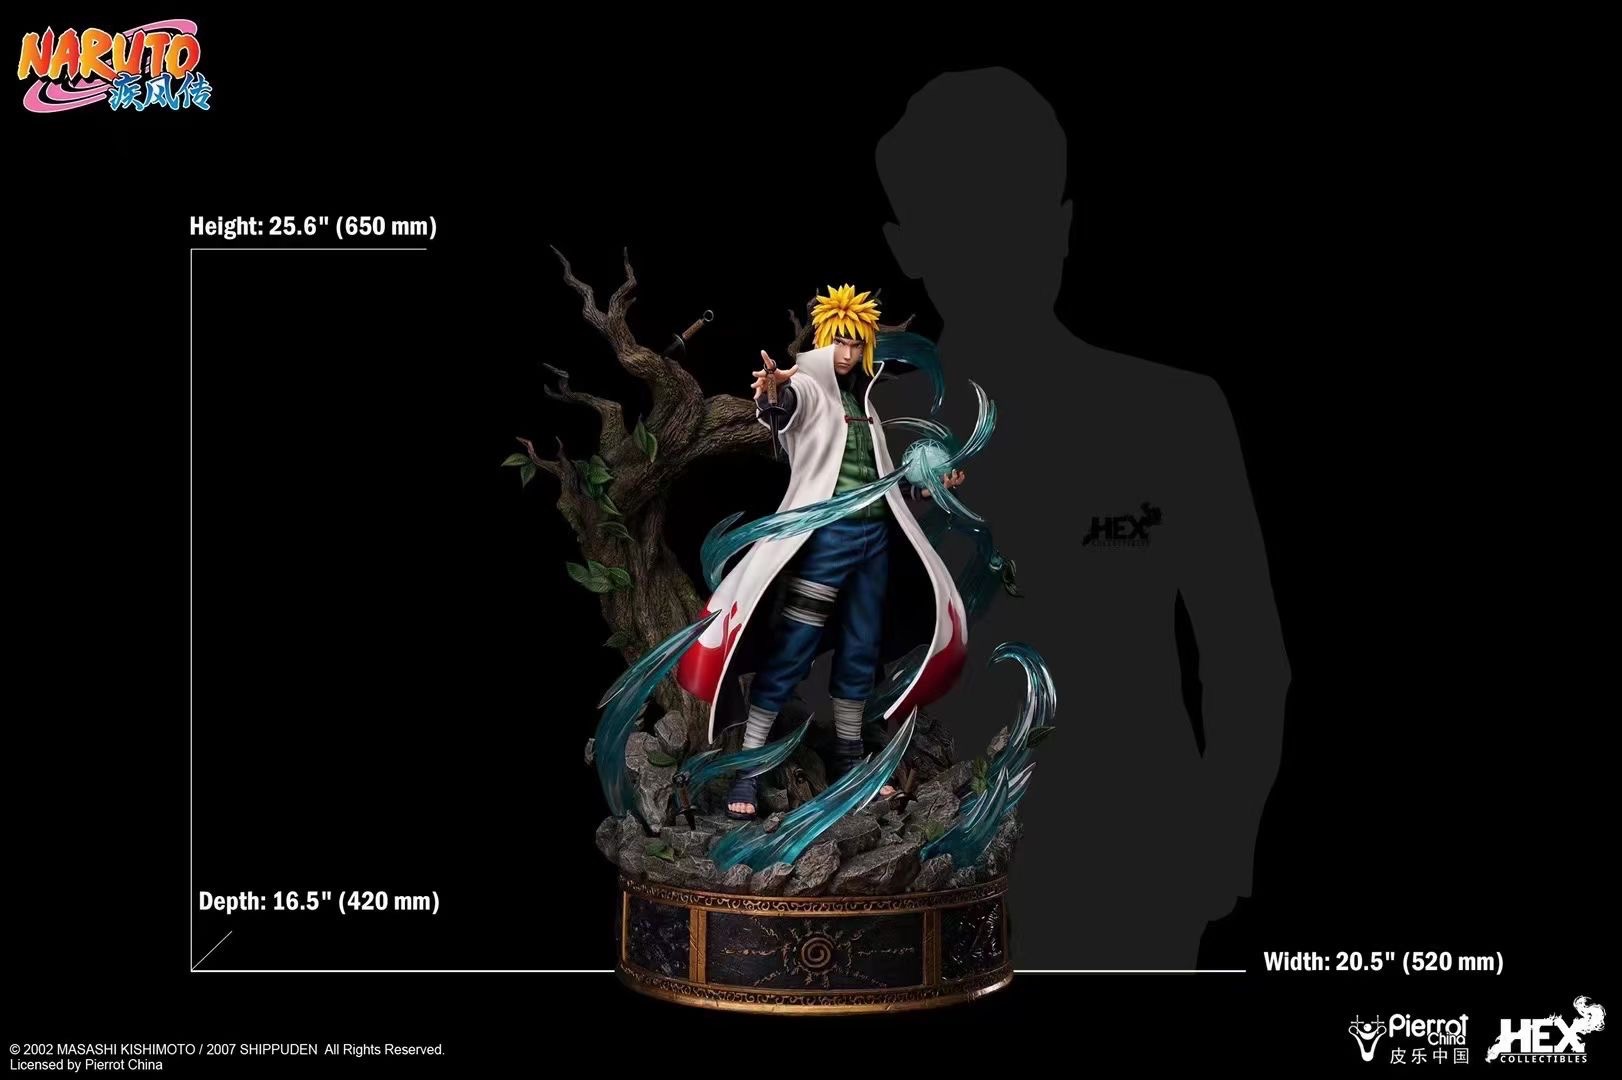 Minato 4Th Hokage “ The Yellow Flash “ ประกายแสงสีทอง มินาโตะ by Hex Collectibles (มัดจำ) [[SOLD OUT]]